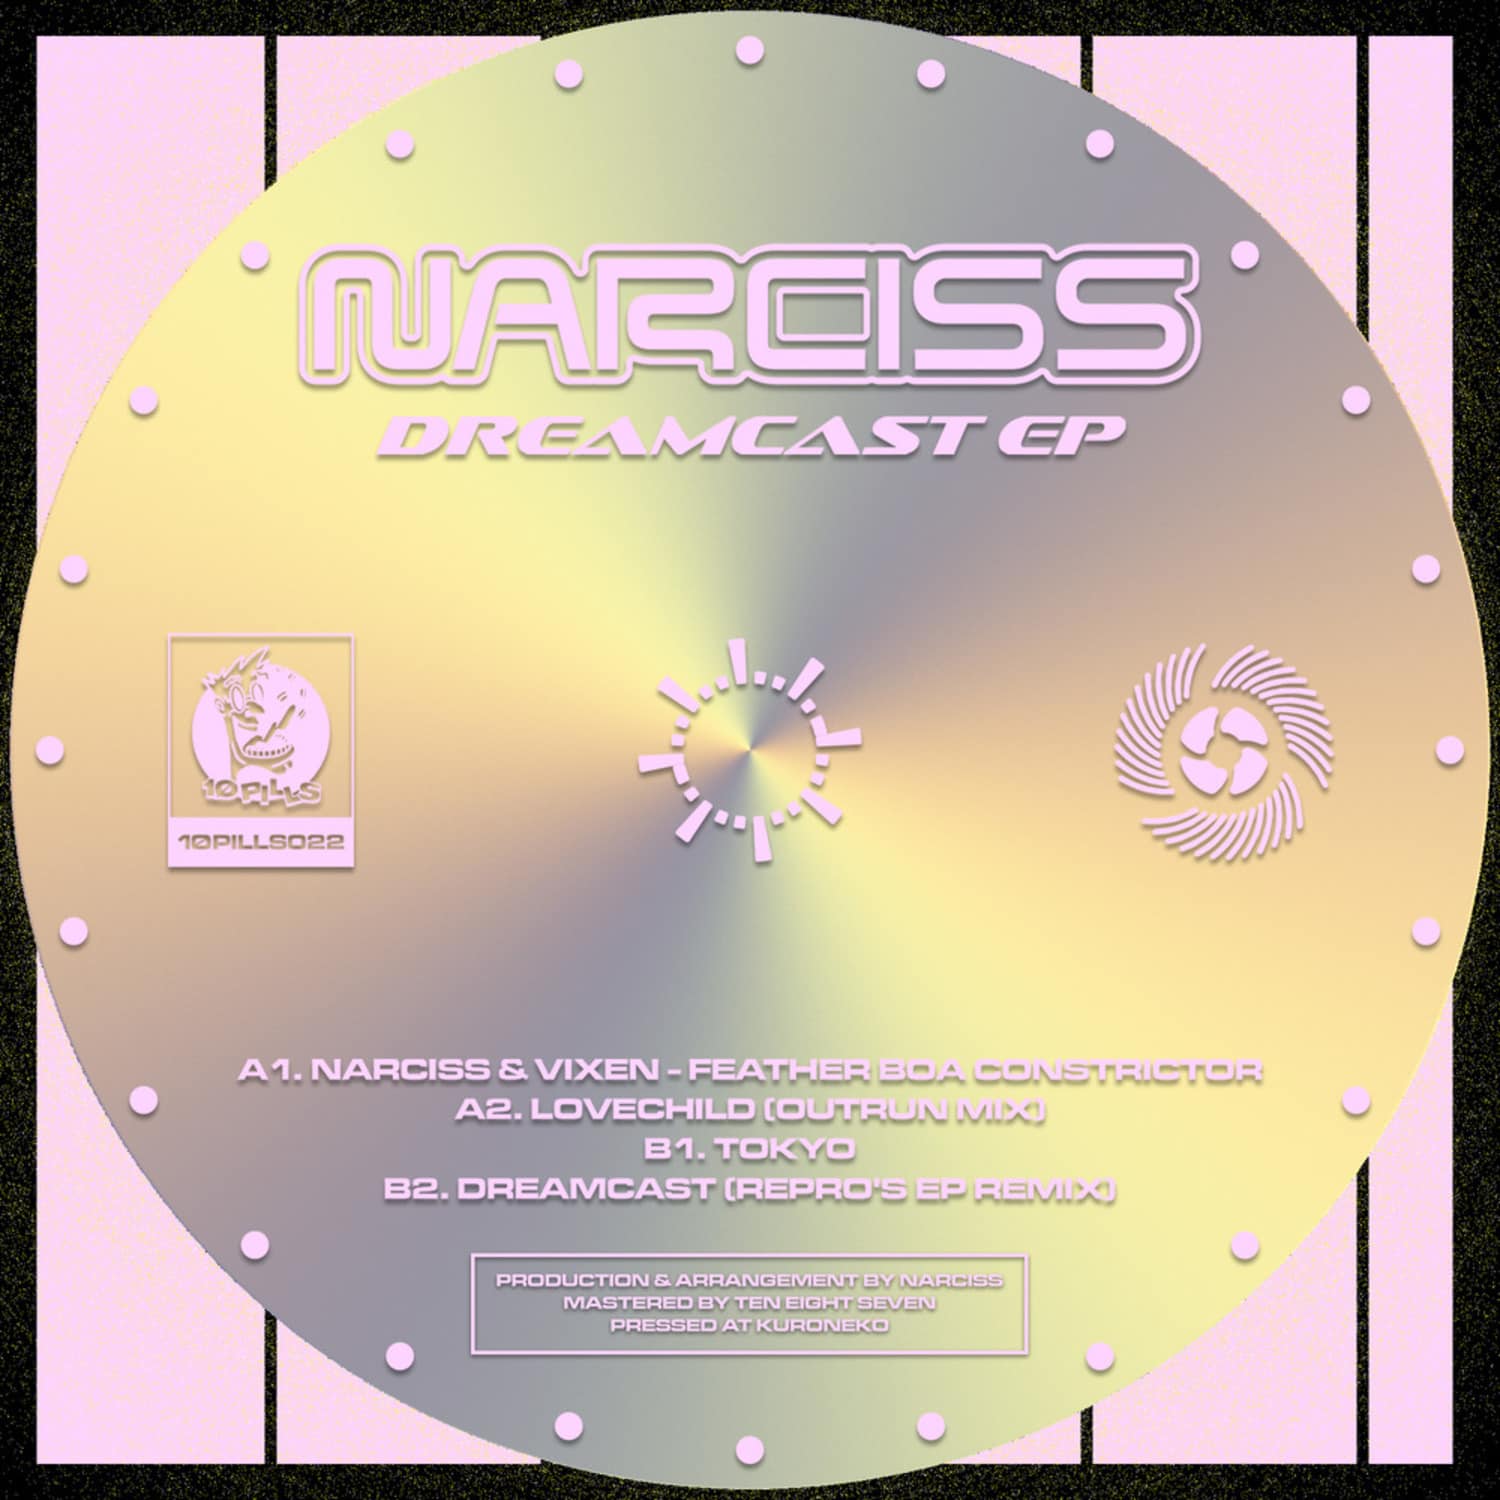 Narciss - DREAMCAST EP